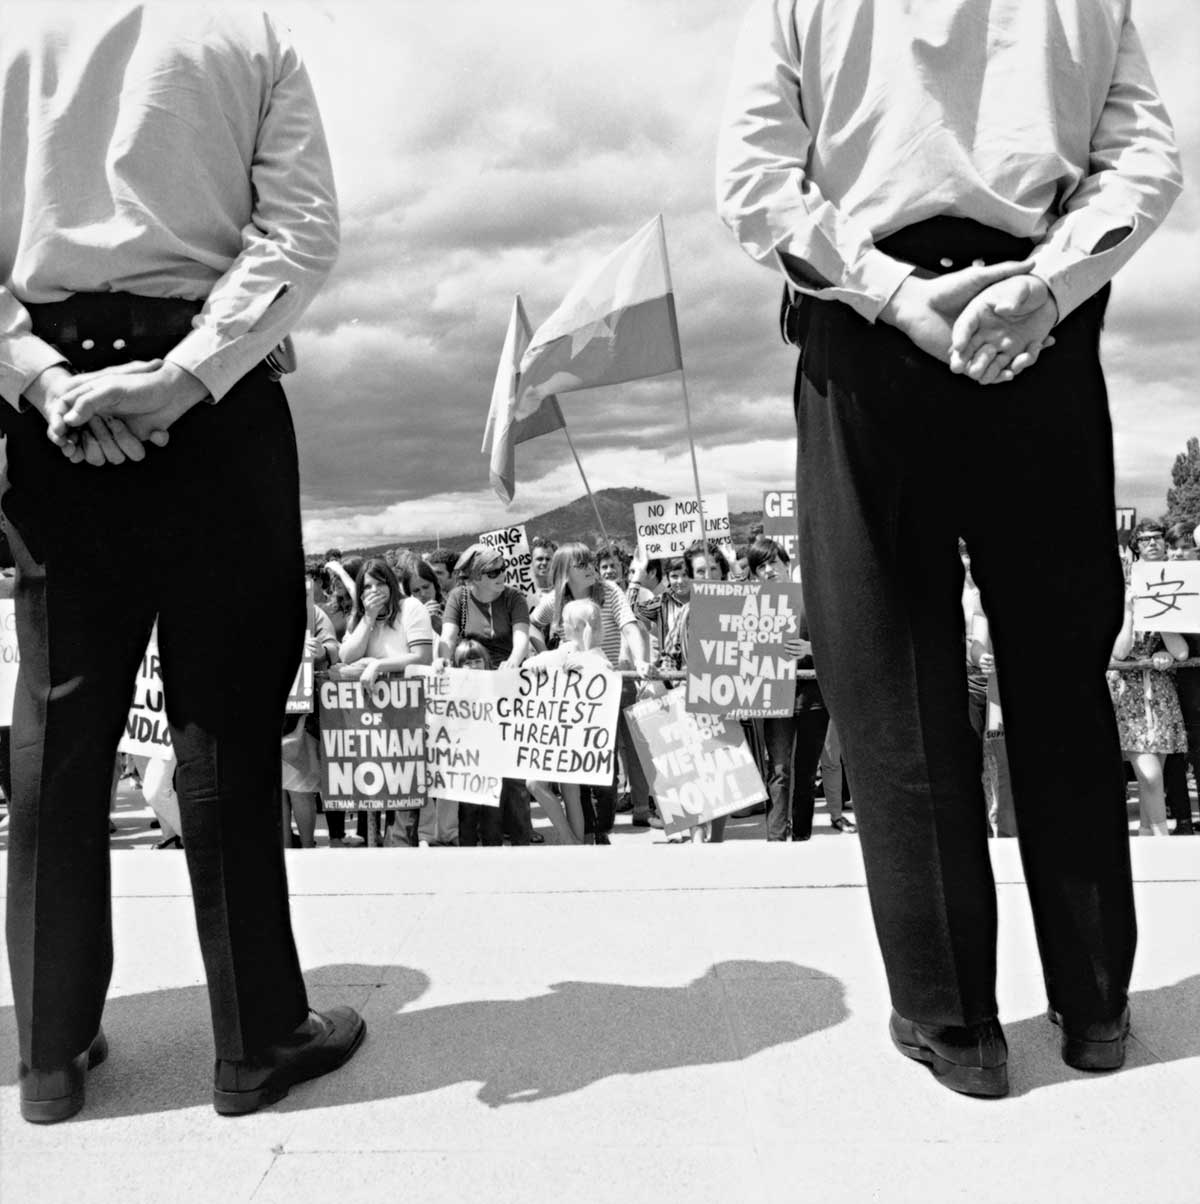 Black and white photograph of two police standing calmly while surveying a large group of protesters.